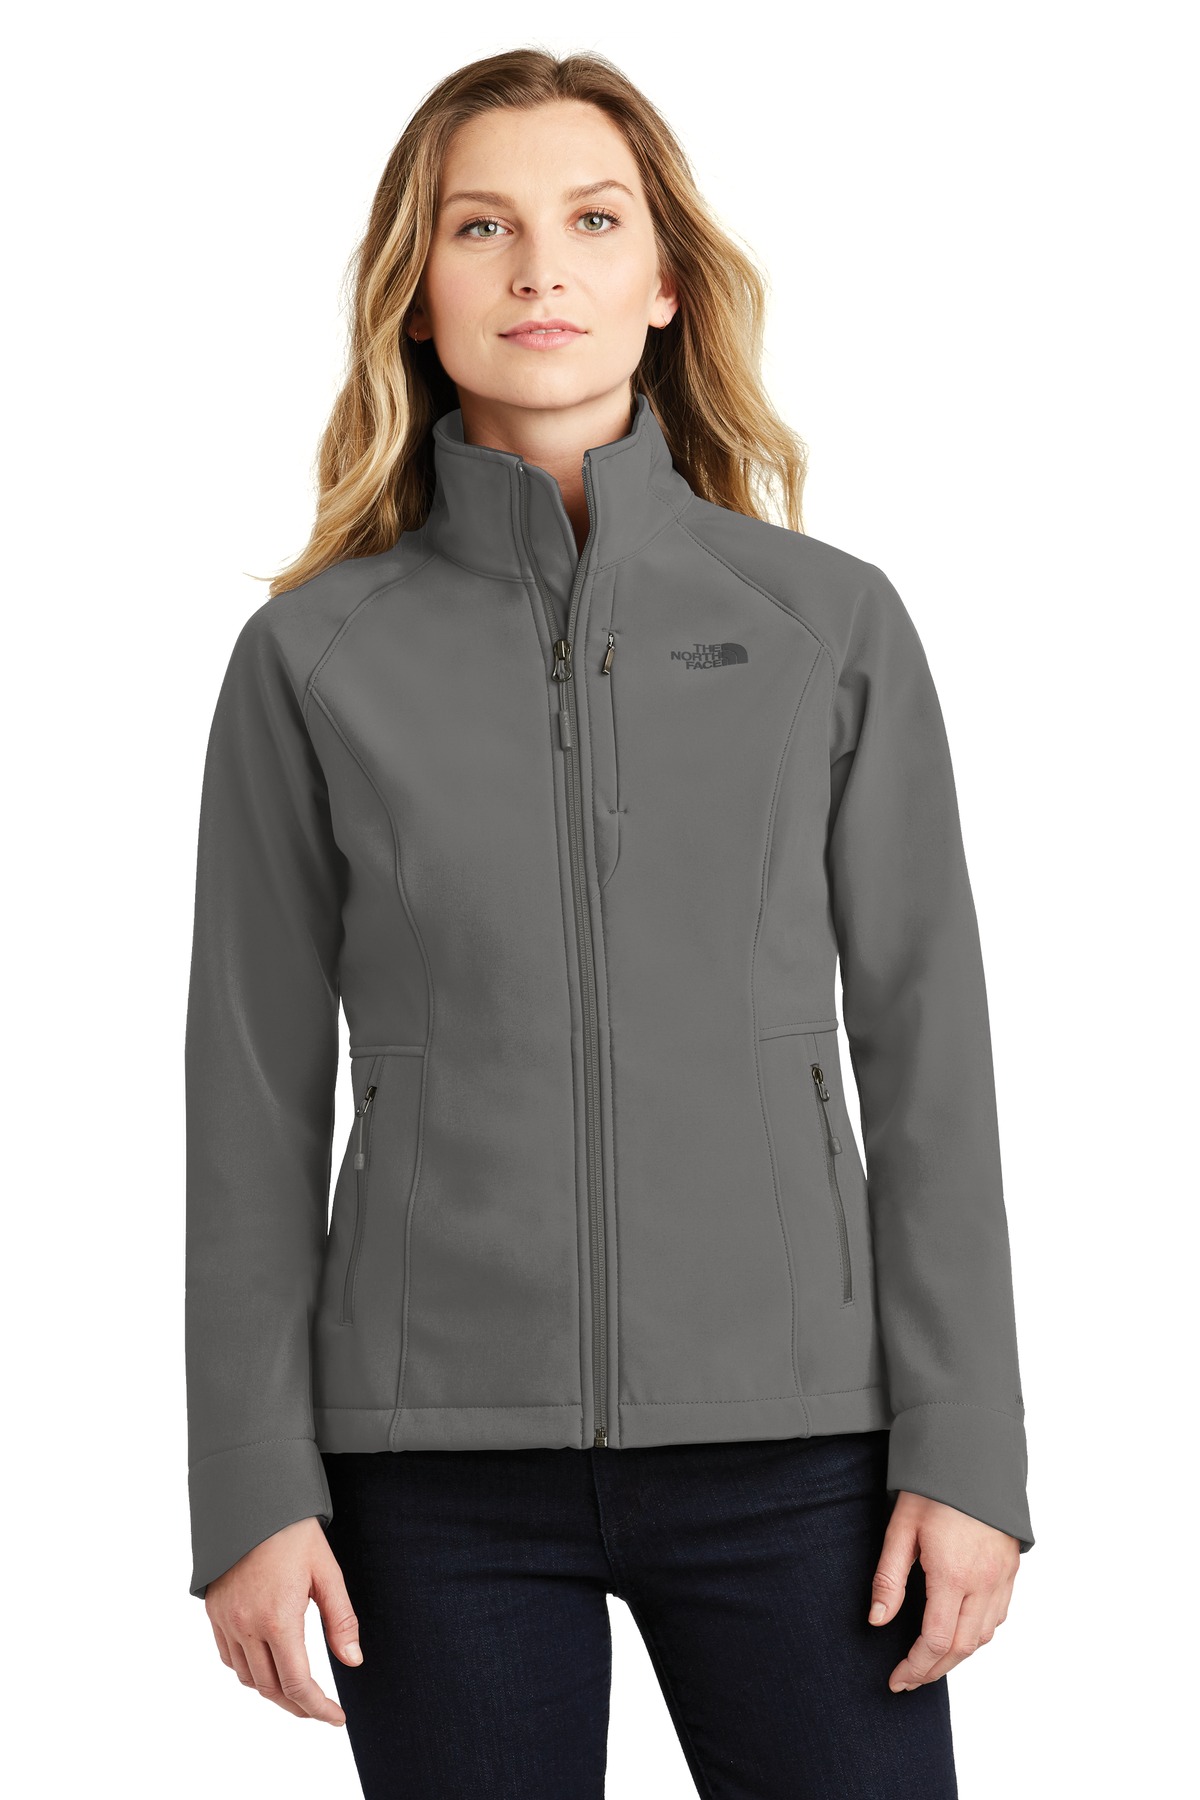 The North Face Ladies Apex Barrier Soft Shell Jacket....